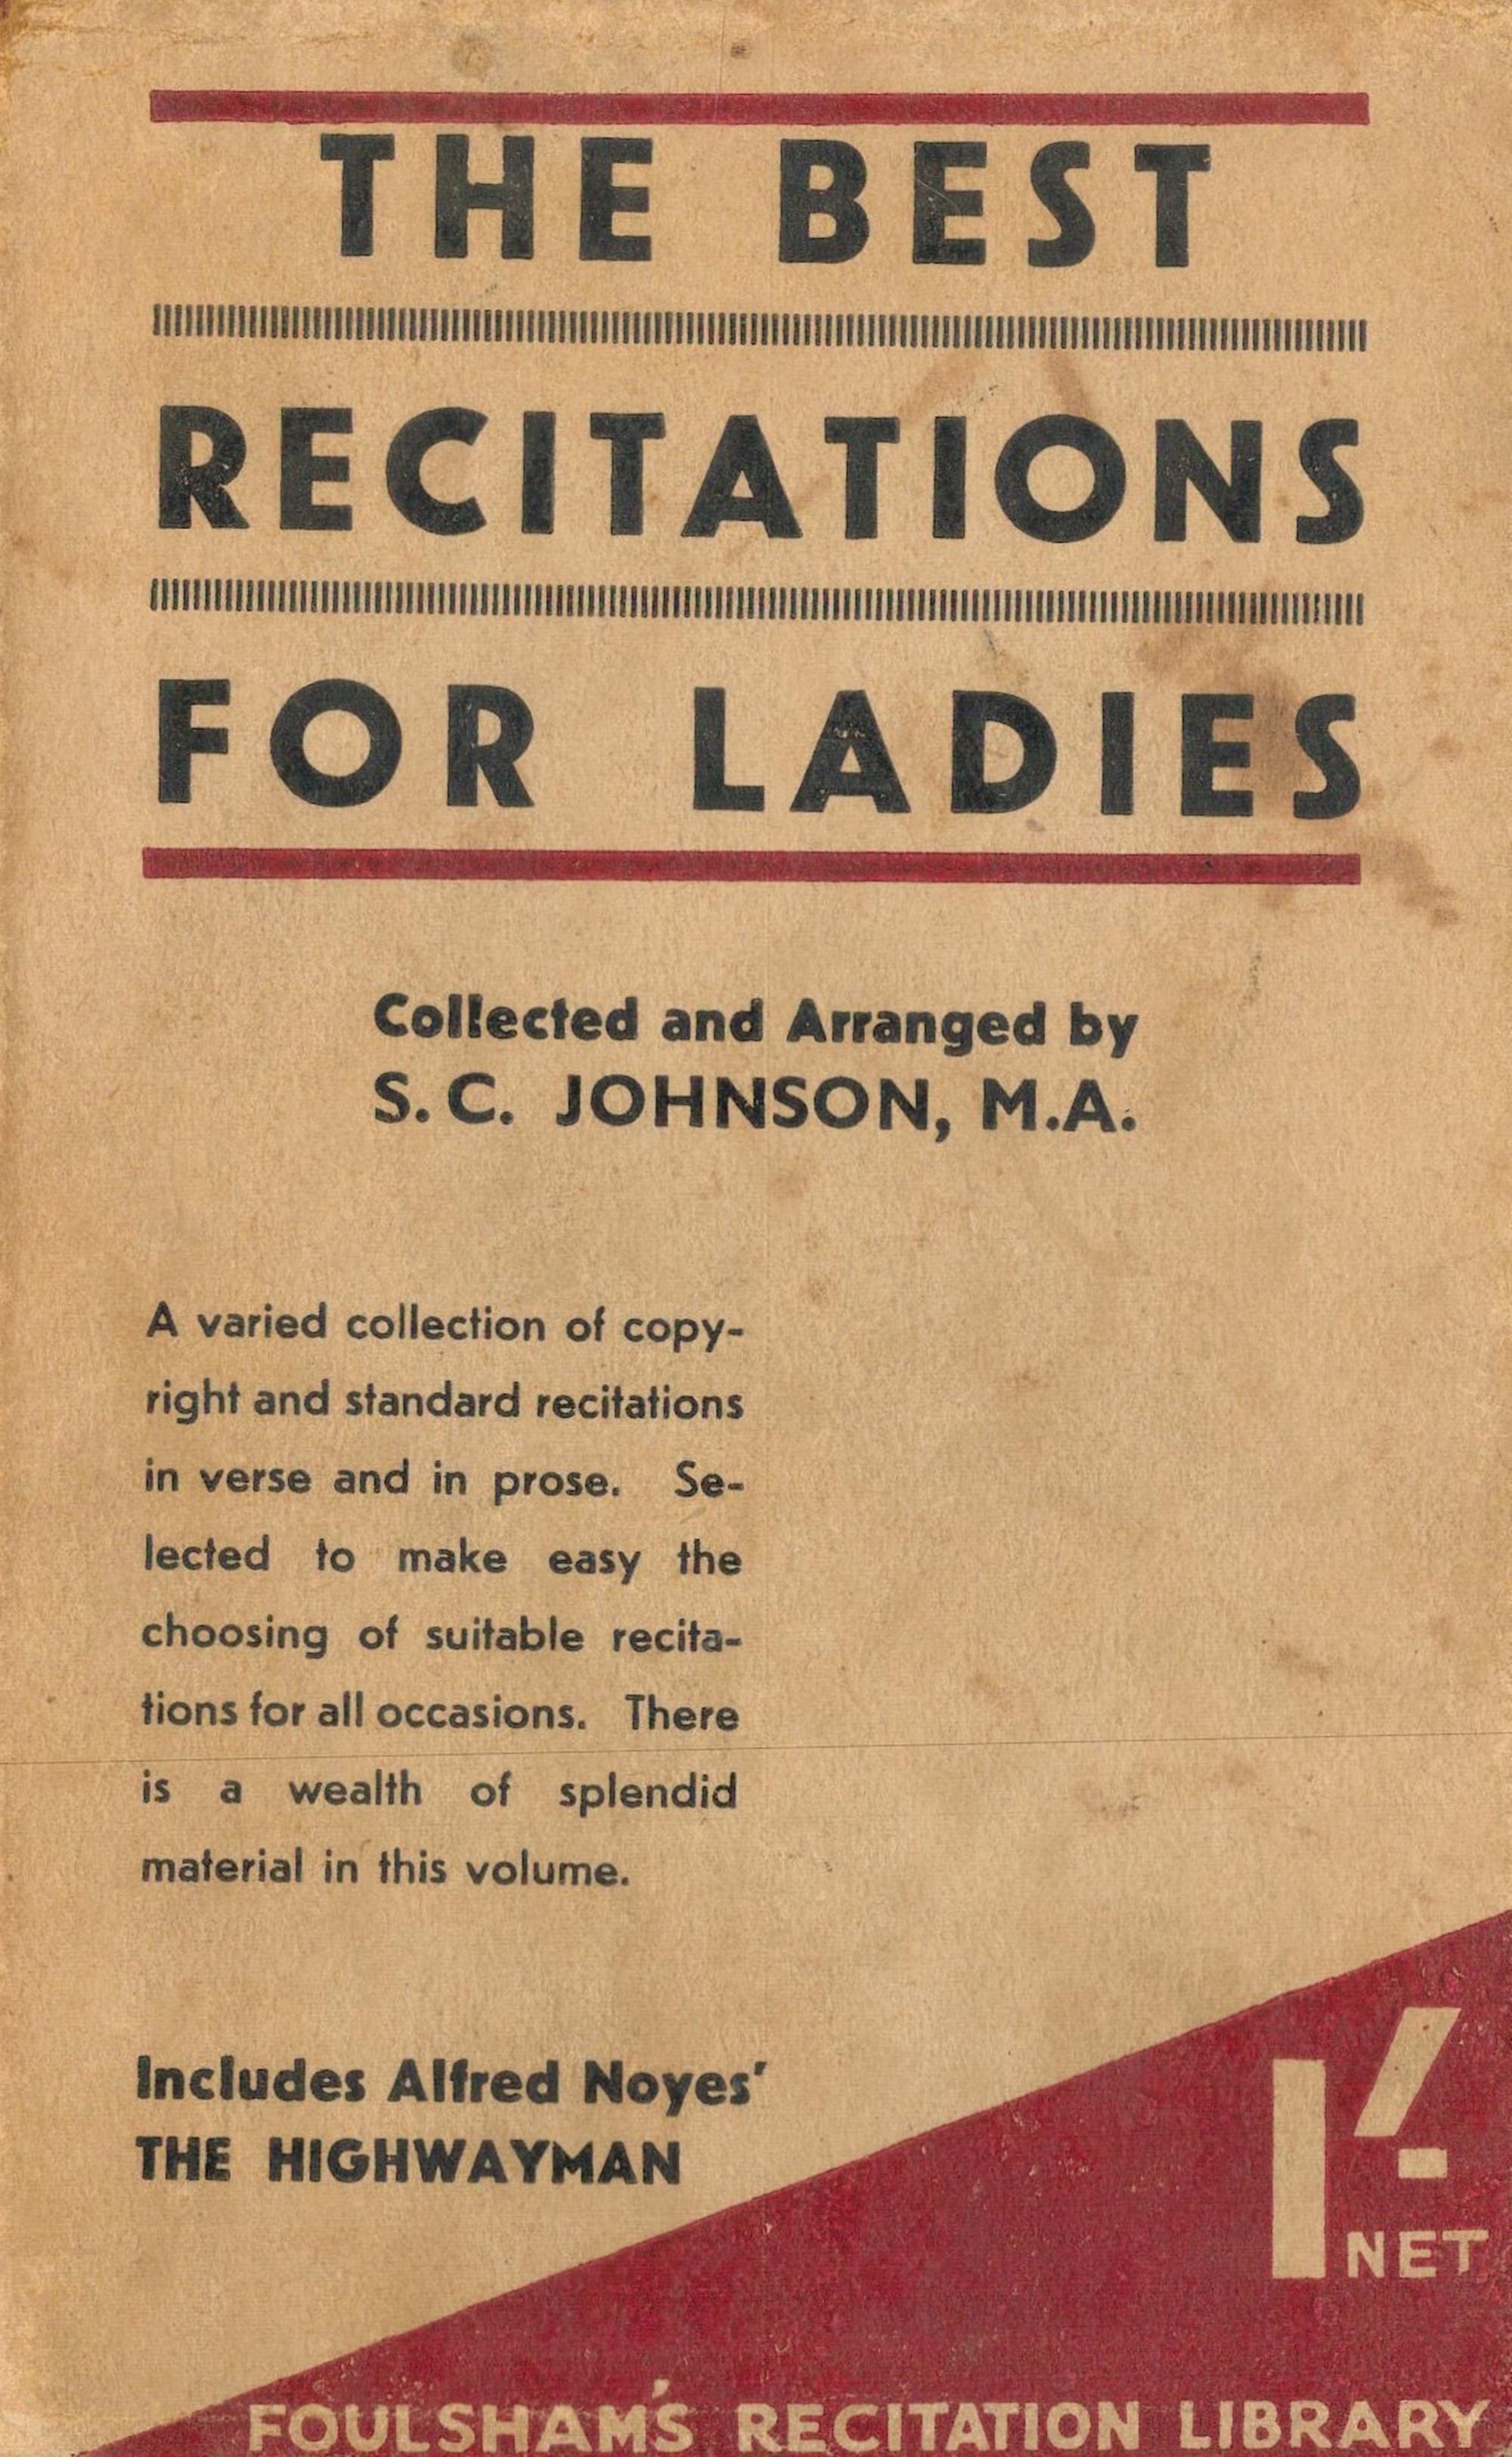 The Best Recitations for Ladies collected by S C Johnson M.A. Hardback Book date and edition unknown - Image 2 of 4